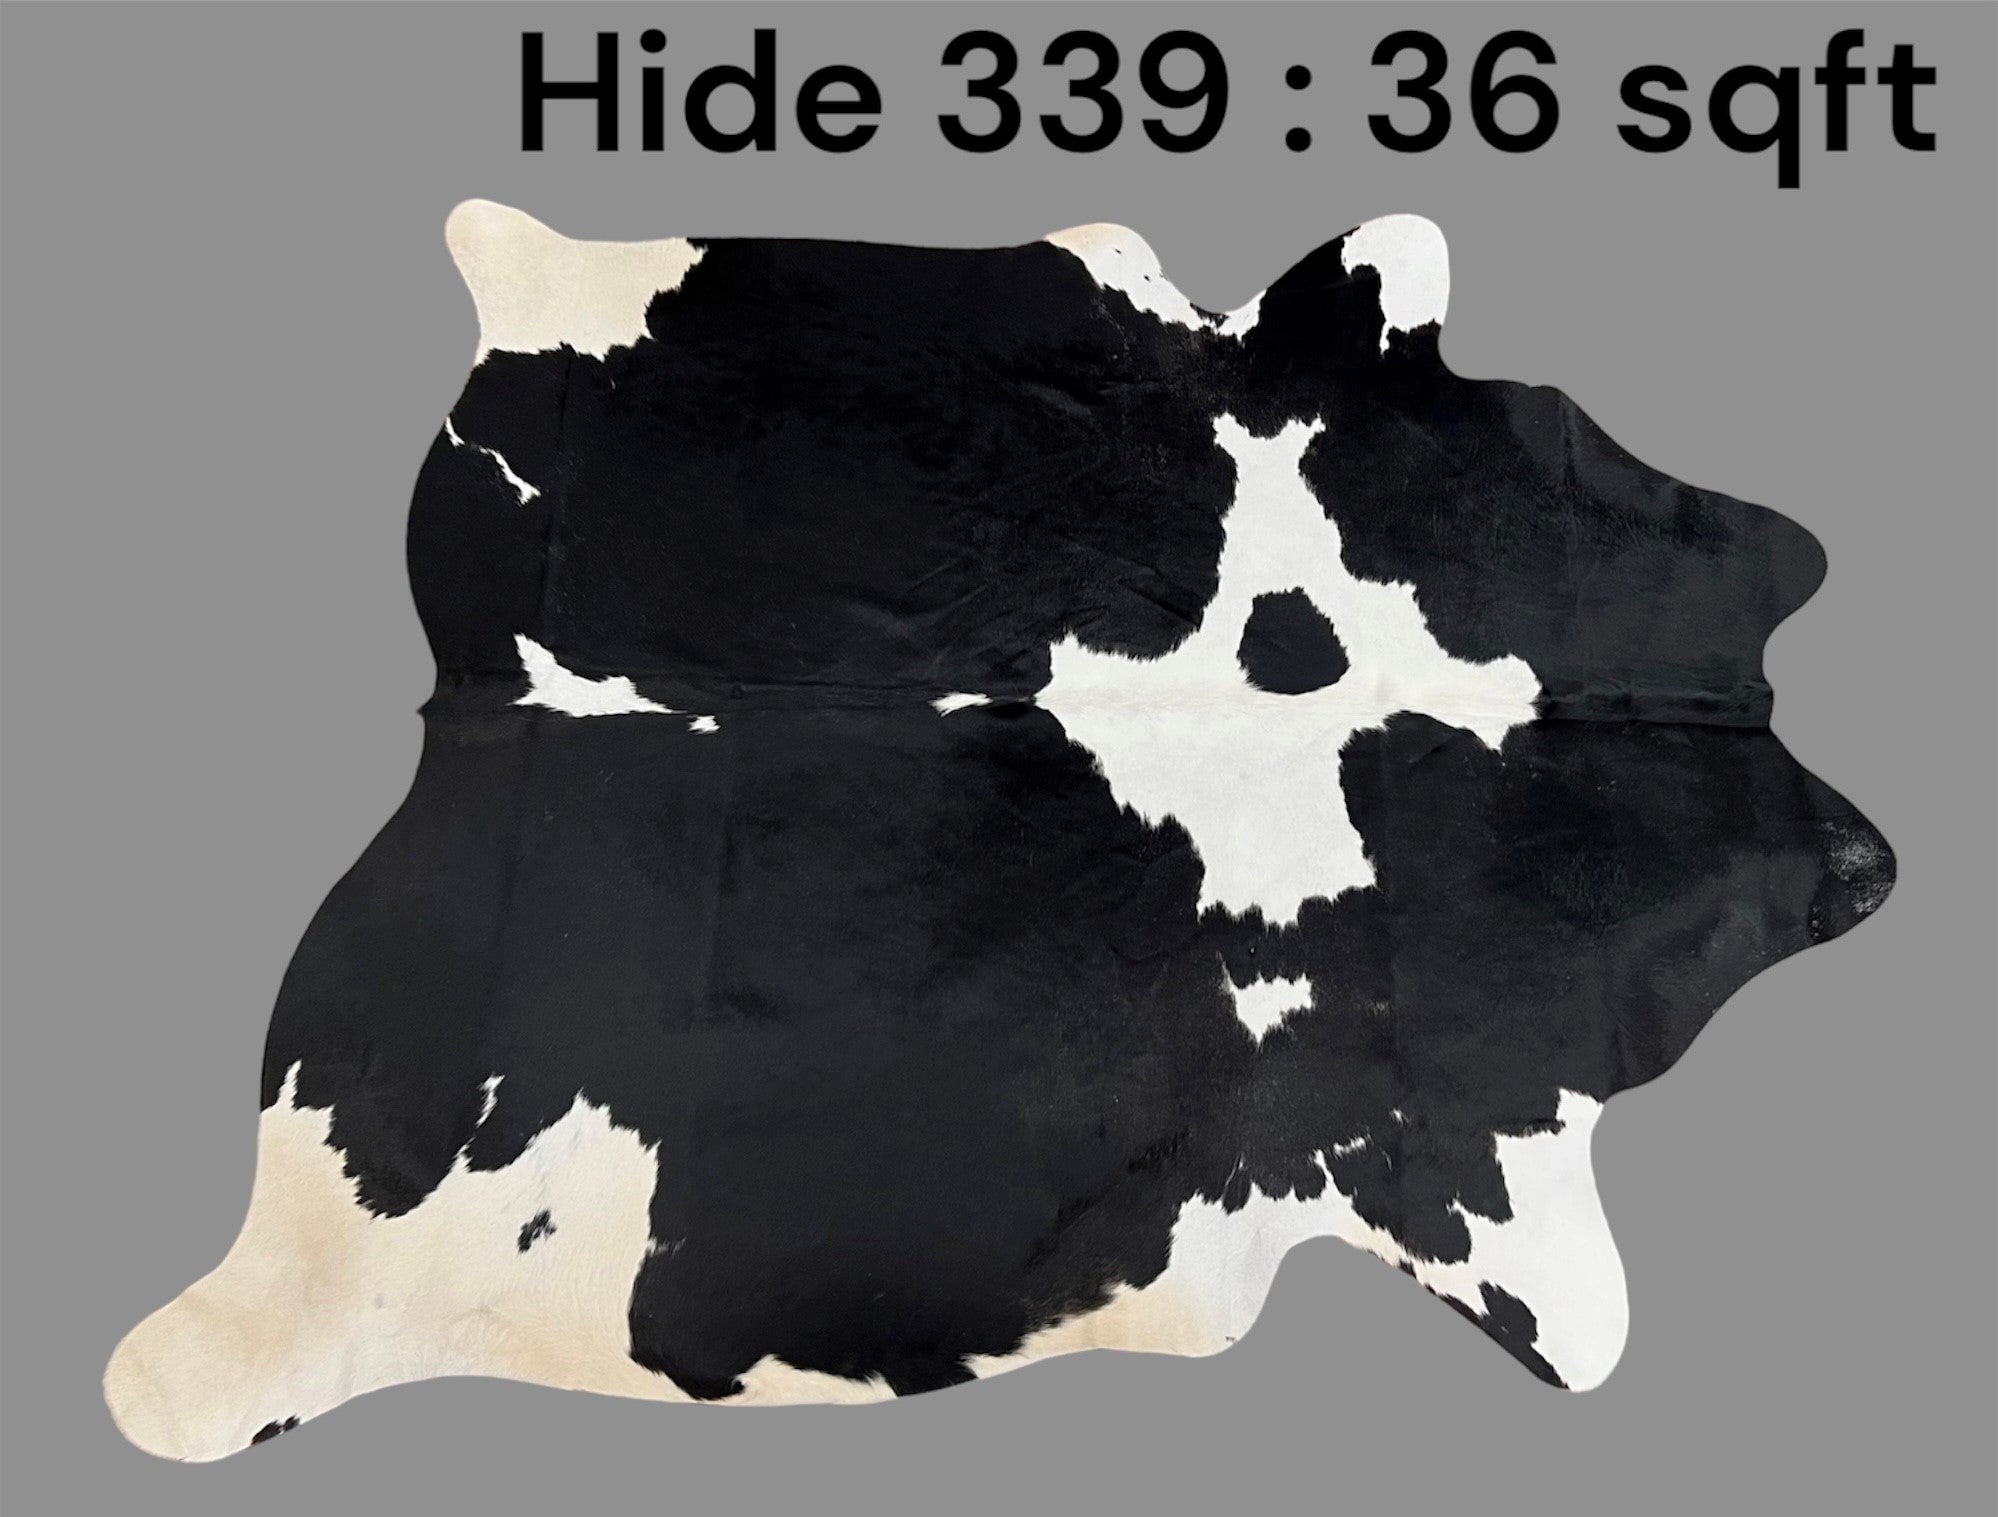 Natural Hair On Cow Hide : This Hide Is Perfect For Wall Hanging, Leather Rugs, Leather Upholstery & Leather Accessories. (Hide339)